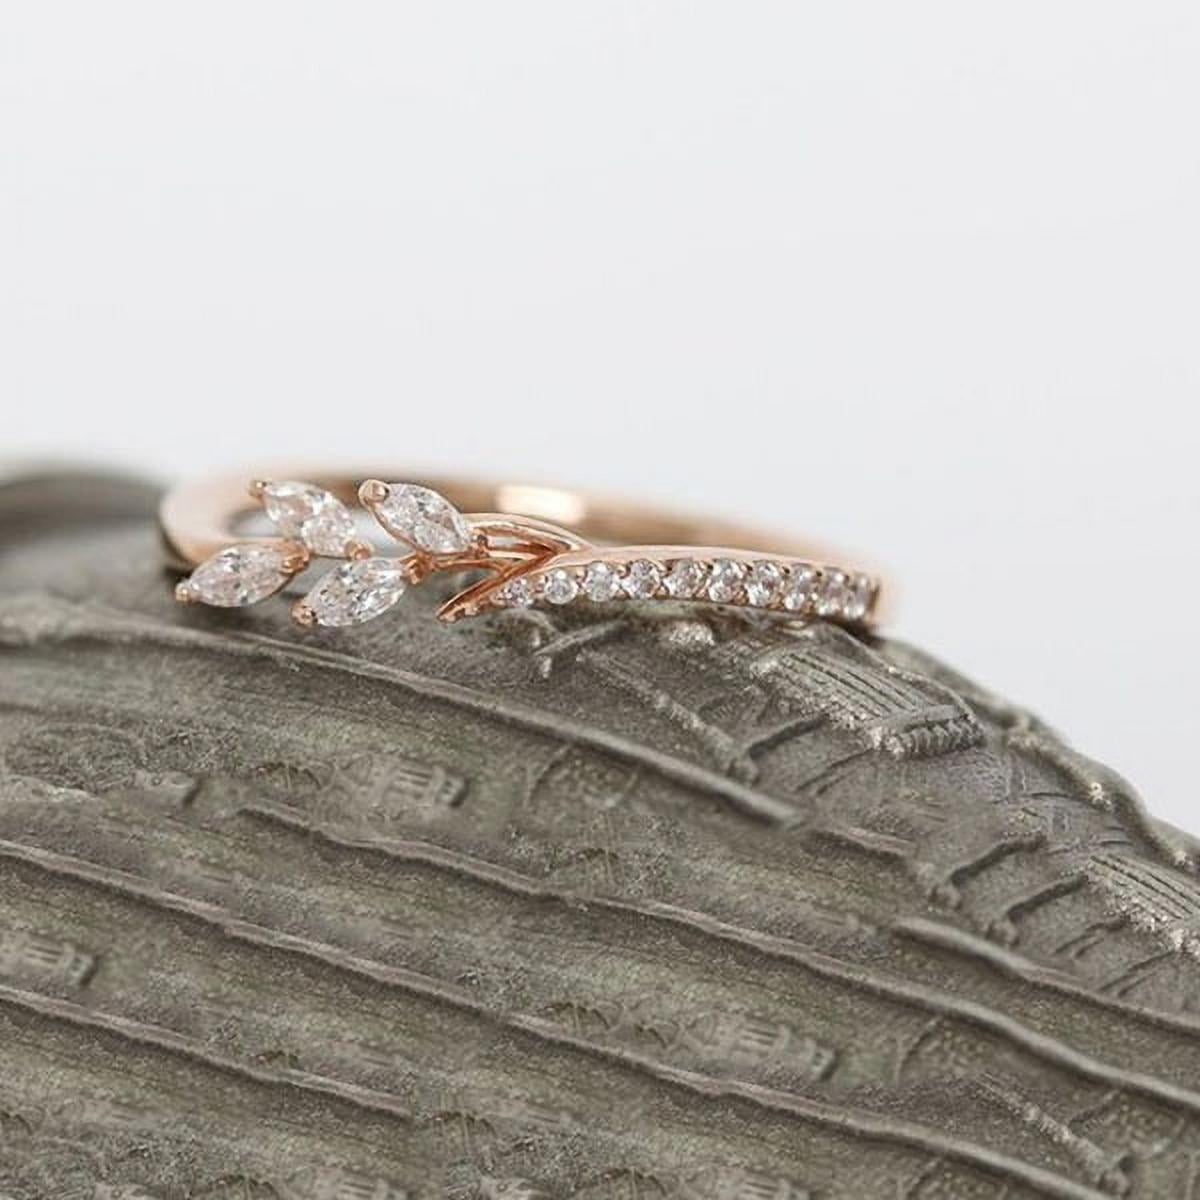 Eternity Wedding Band, Pink Gold and Diamonds - Categories Q9L95G